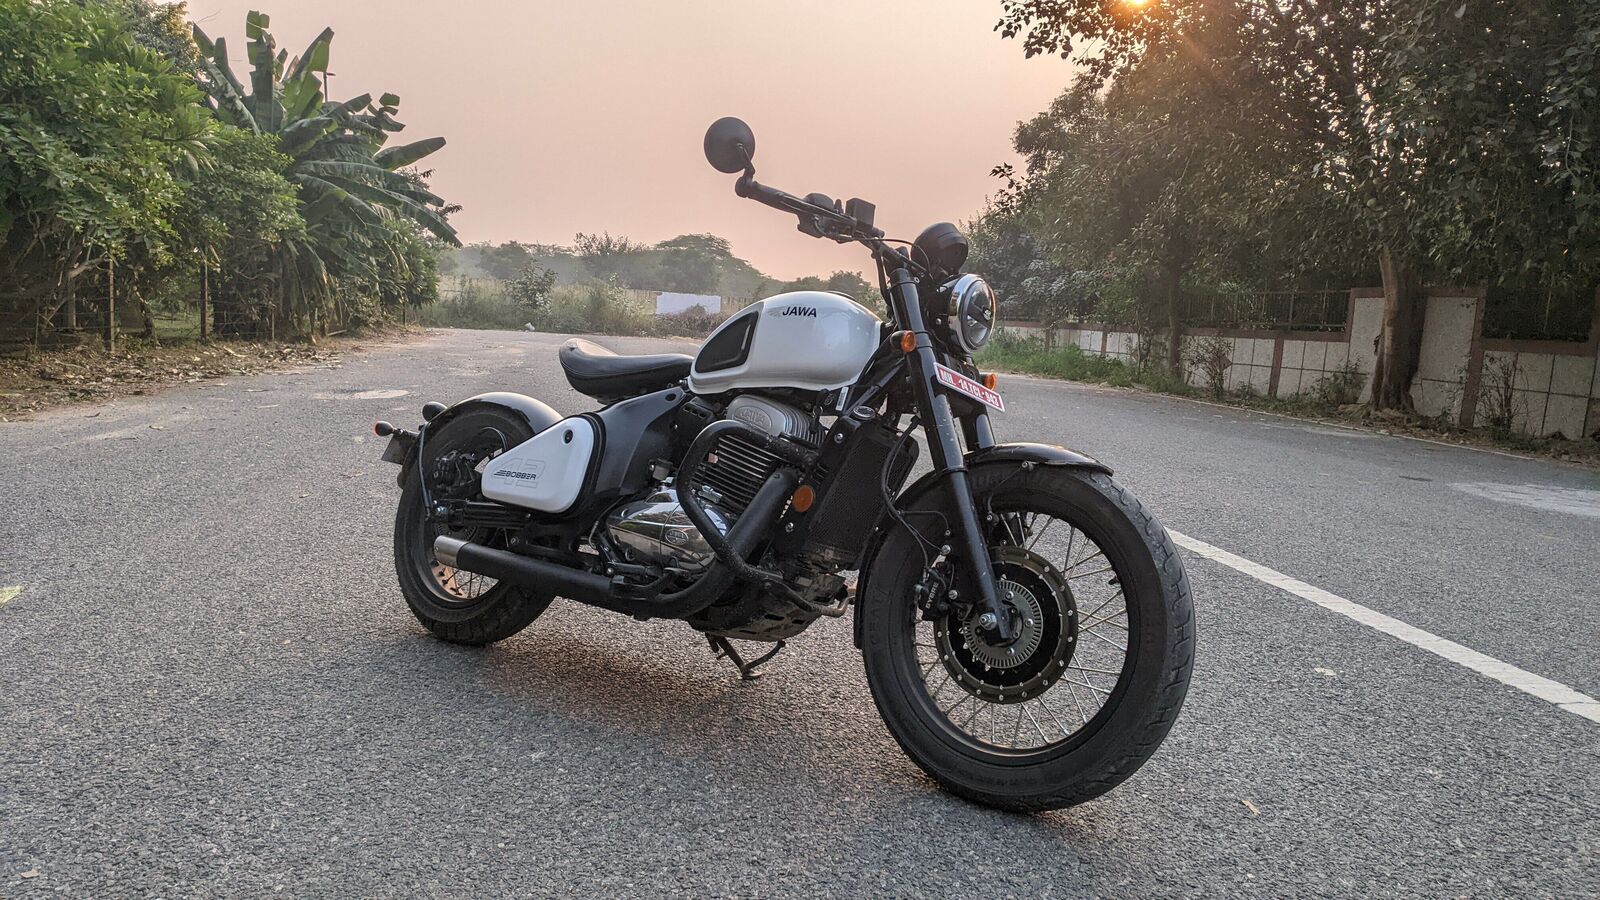 Jawa 42 Bobber first ride review: Most affordable bobber that you can buy